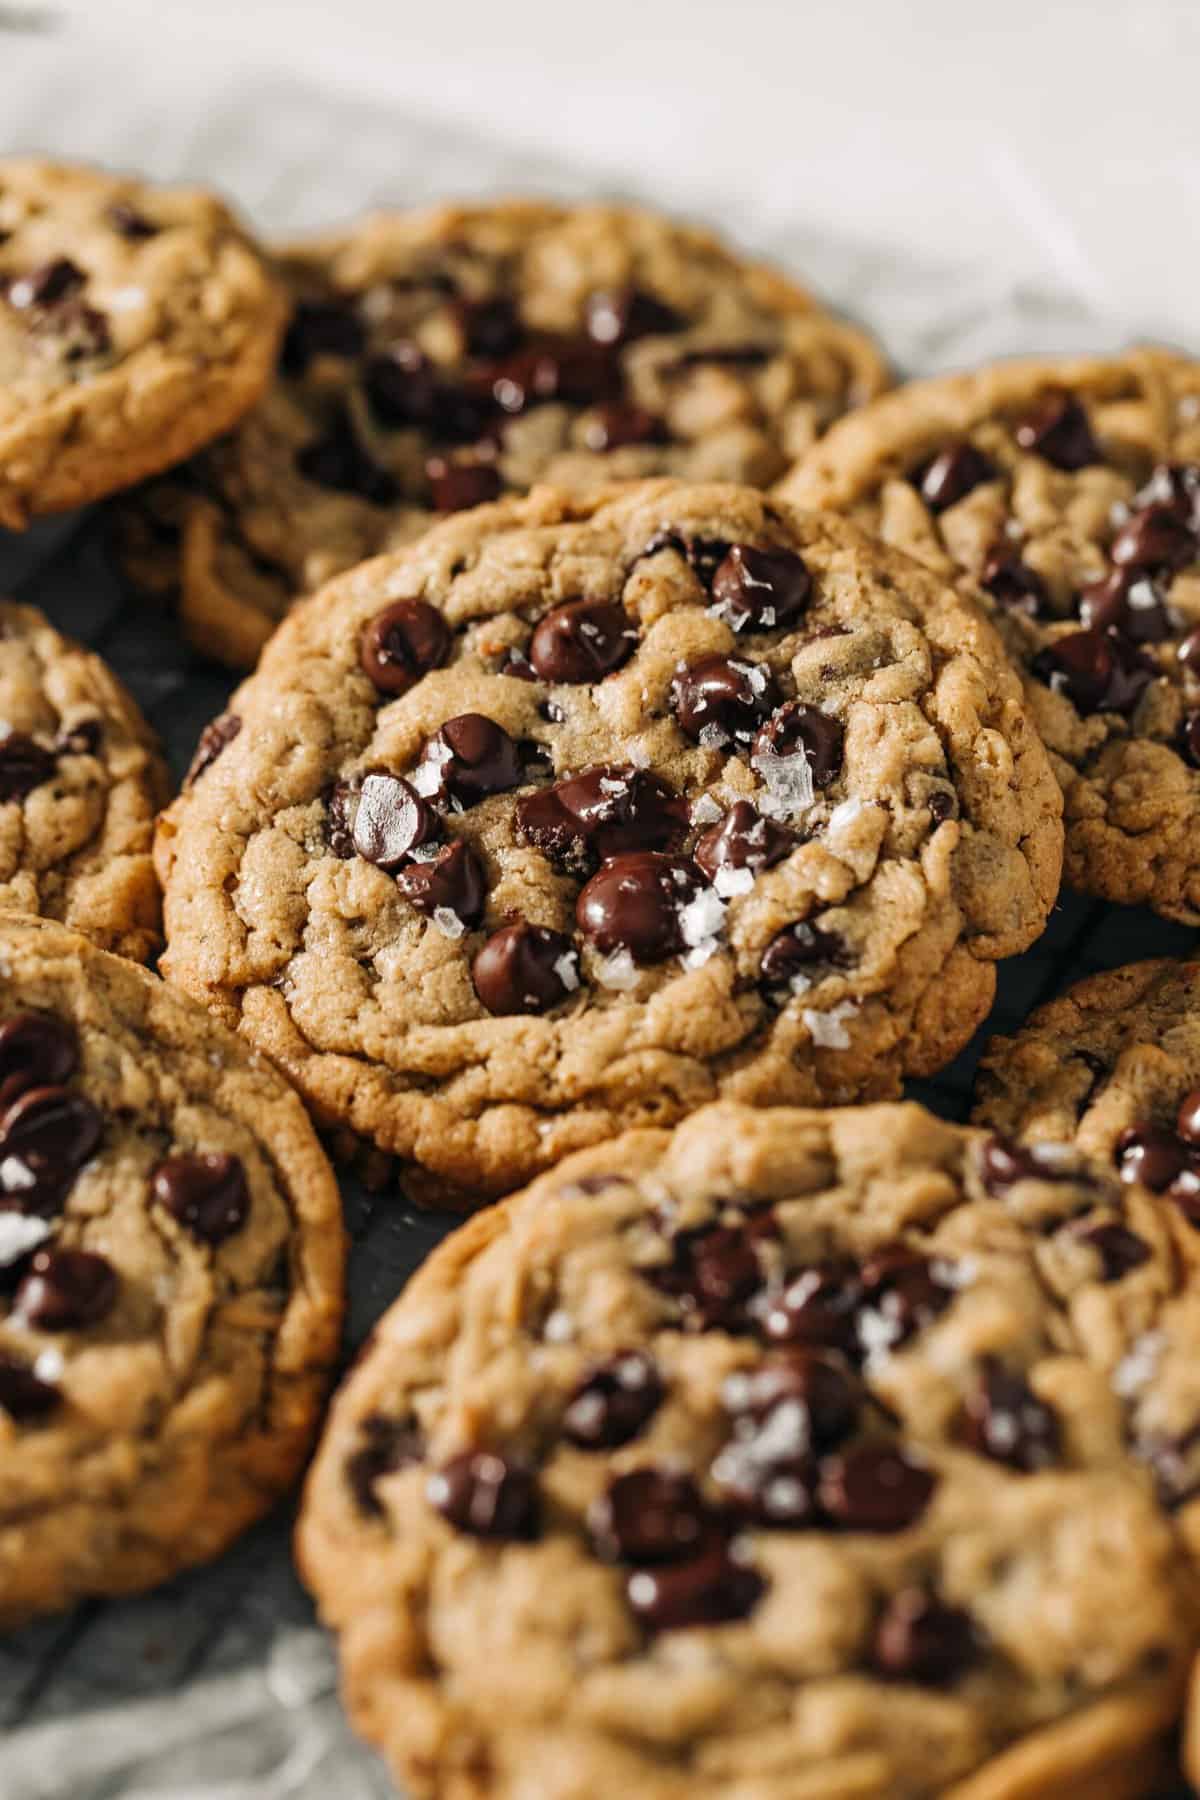 Peanut butter oatmeal chocolate chip cookies.